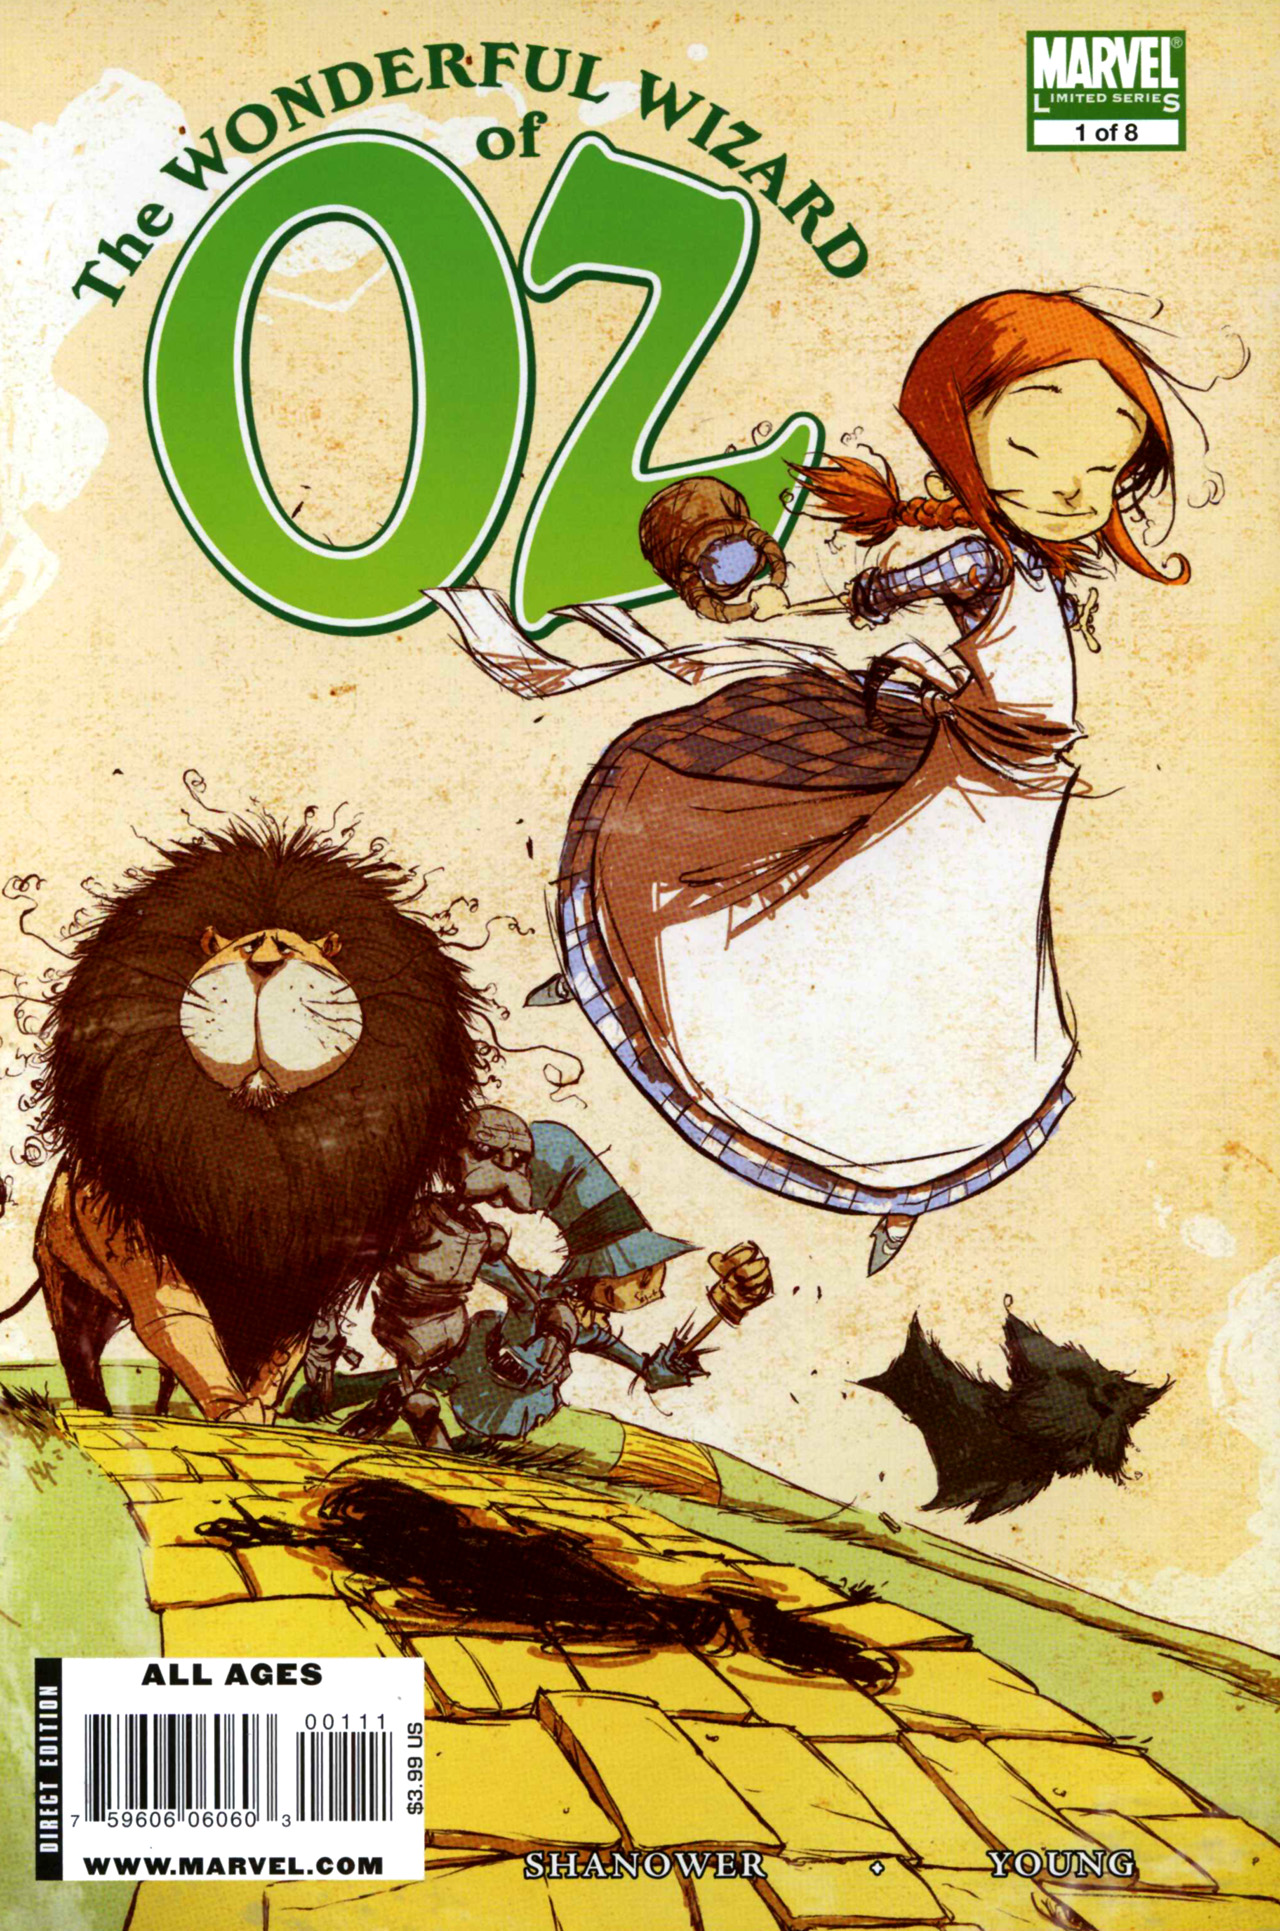 Read online The Wonderful Wizard of Oz comic -  Issue #1 - 1